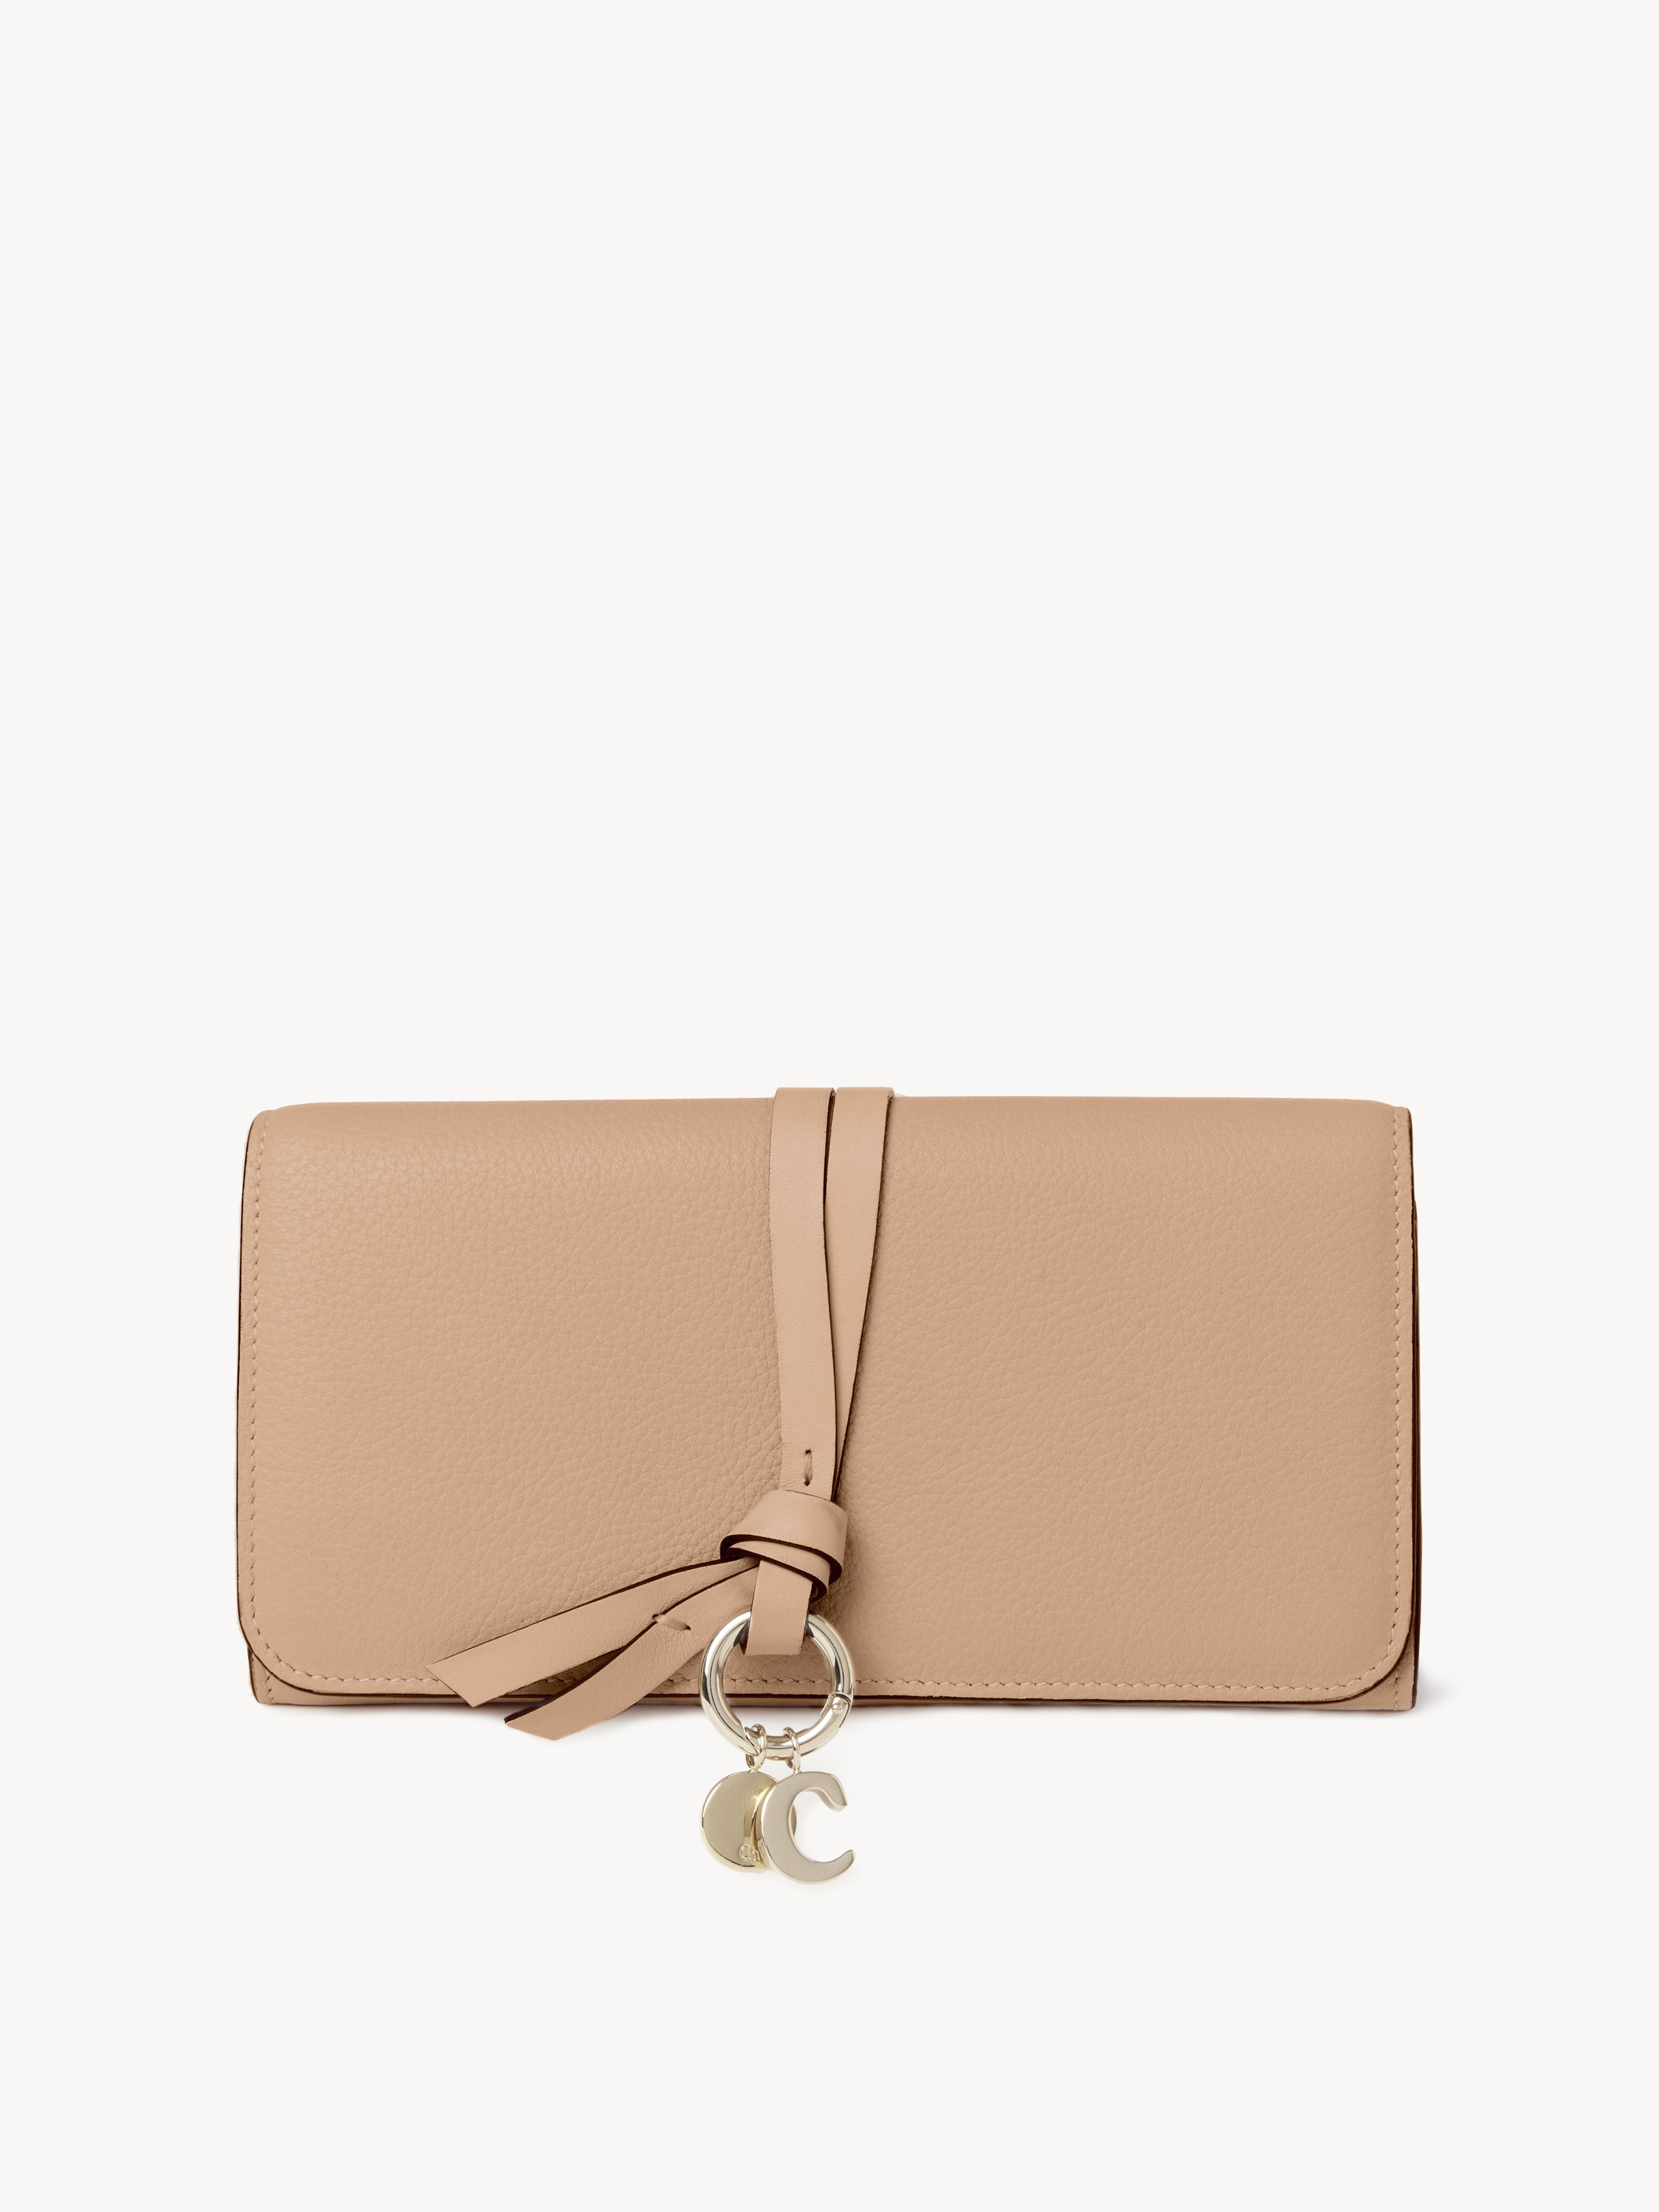 CHLOÉ ALPHABET WALLET WITH FLAP BROWN SIZE ONESIZE 100% CALF-SKIN LEATHER